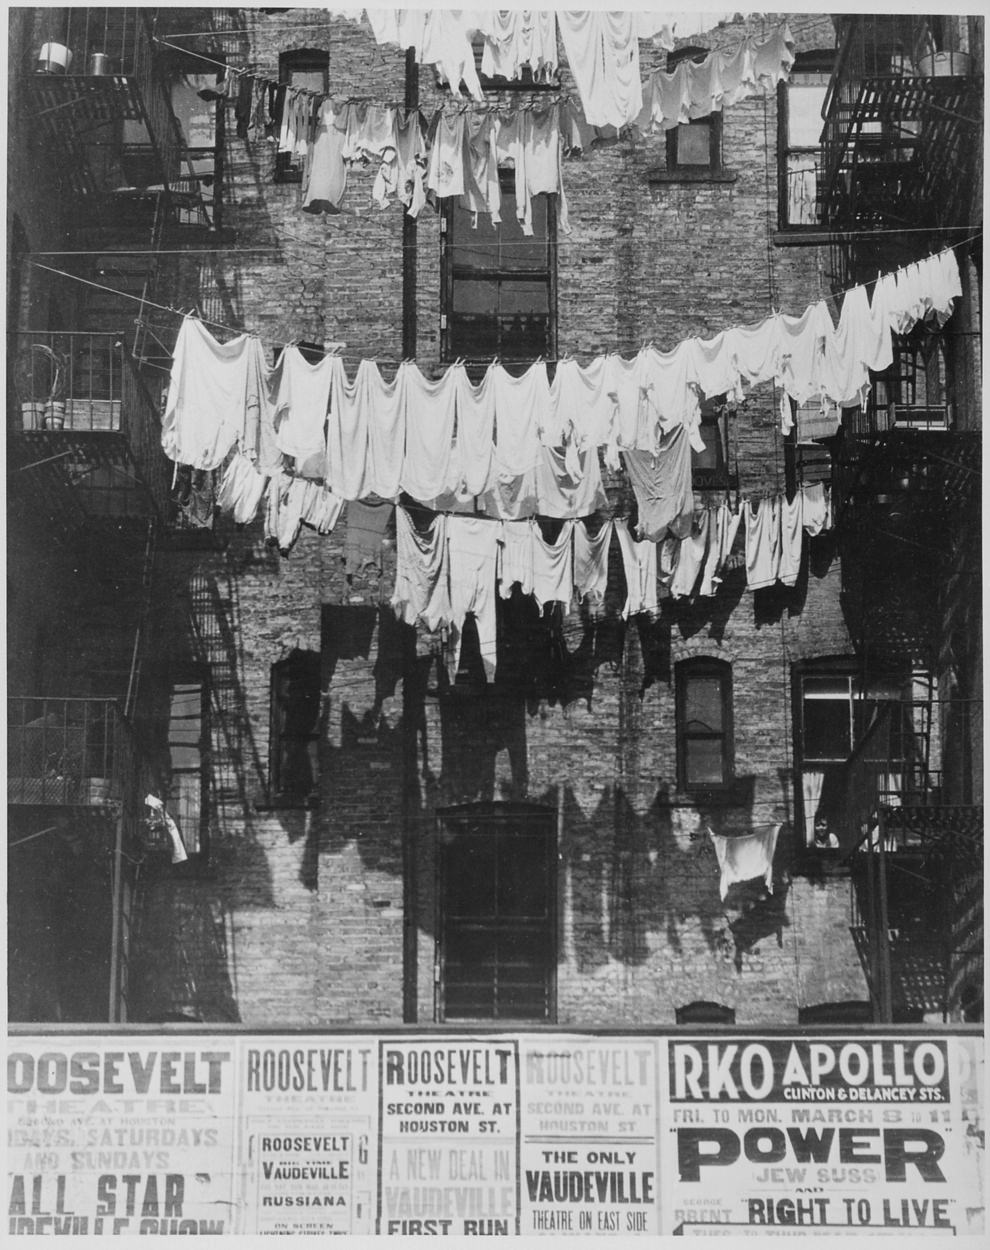 Rows of laundry outside a New York City apartment house, 1935. (U.S. National Archives and Records Administration)